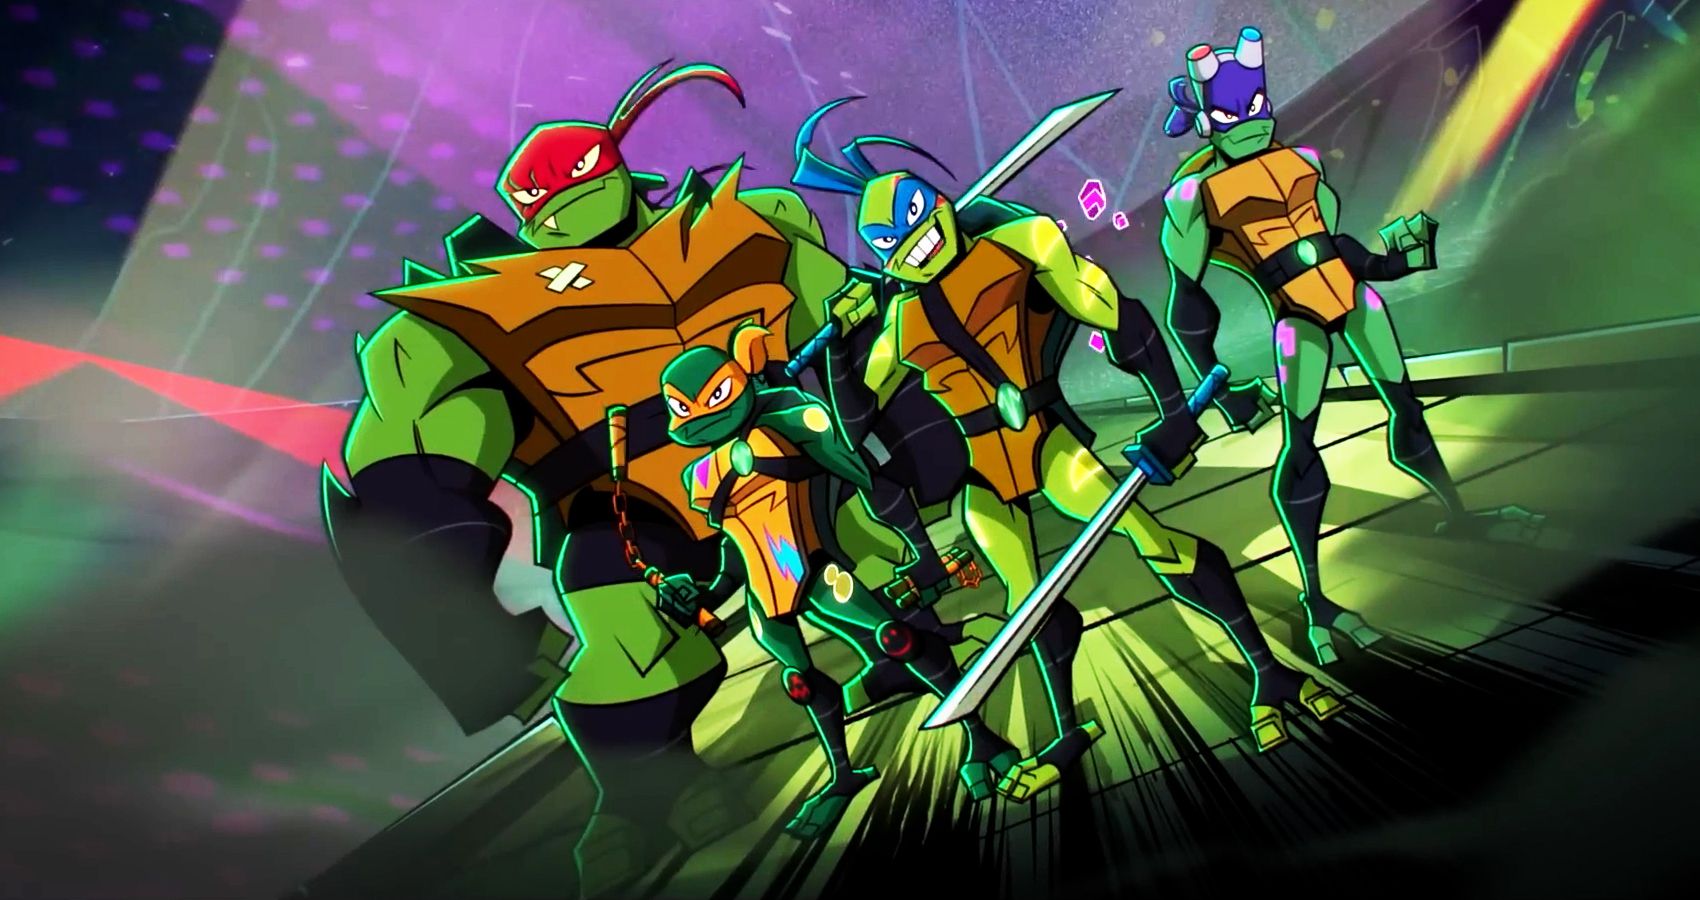 #Could Rise of the Teenage Mutant Ninja Turtles Pave the Way for a Live-Action Sequel?